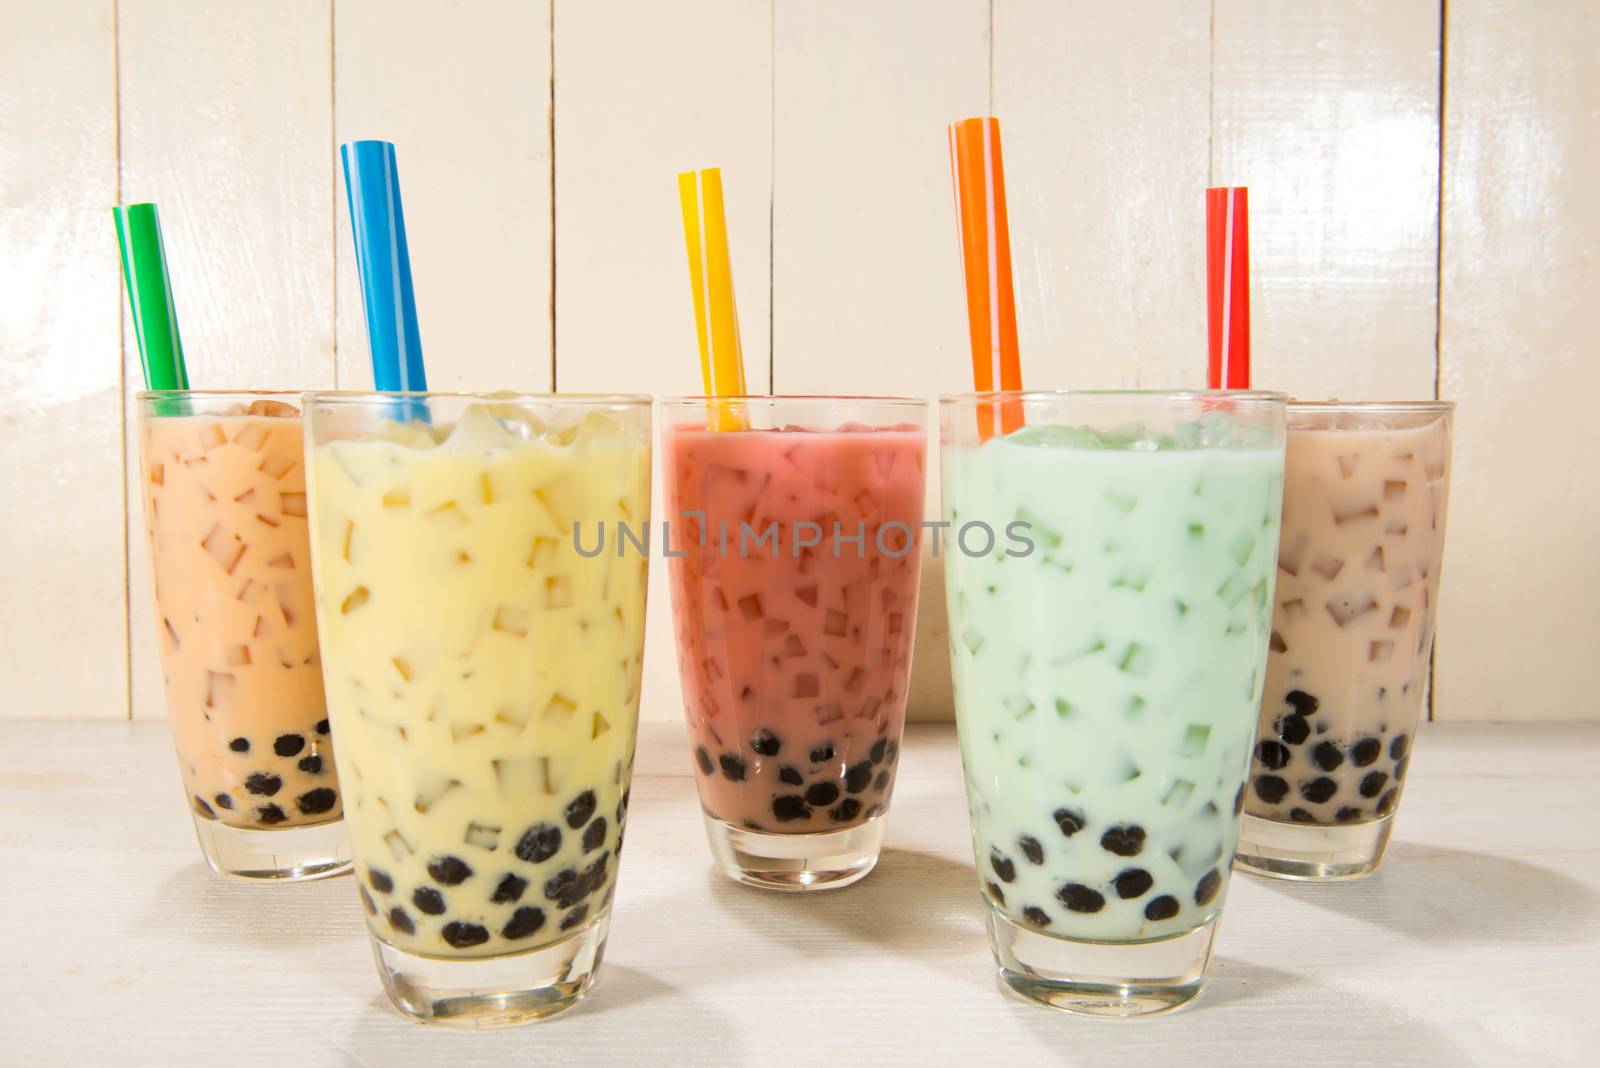 Boba / Bubble tea. Homemade Various Milk Tea with Pearls on wood by makidotvn